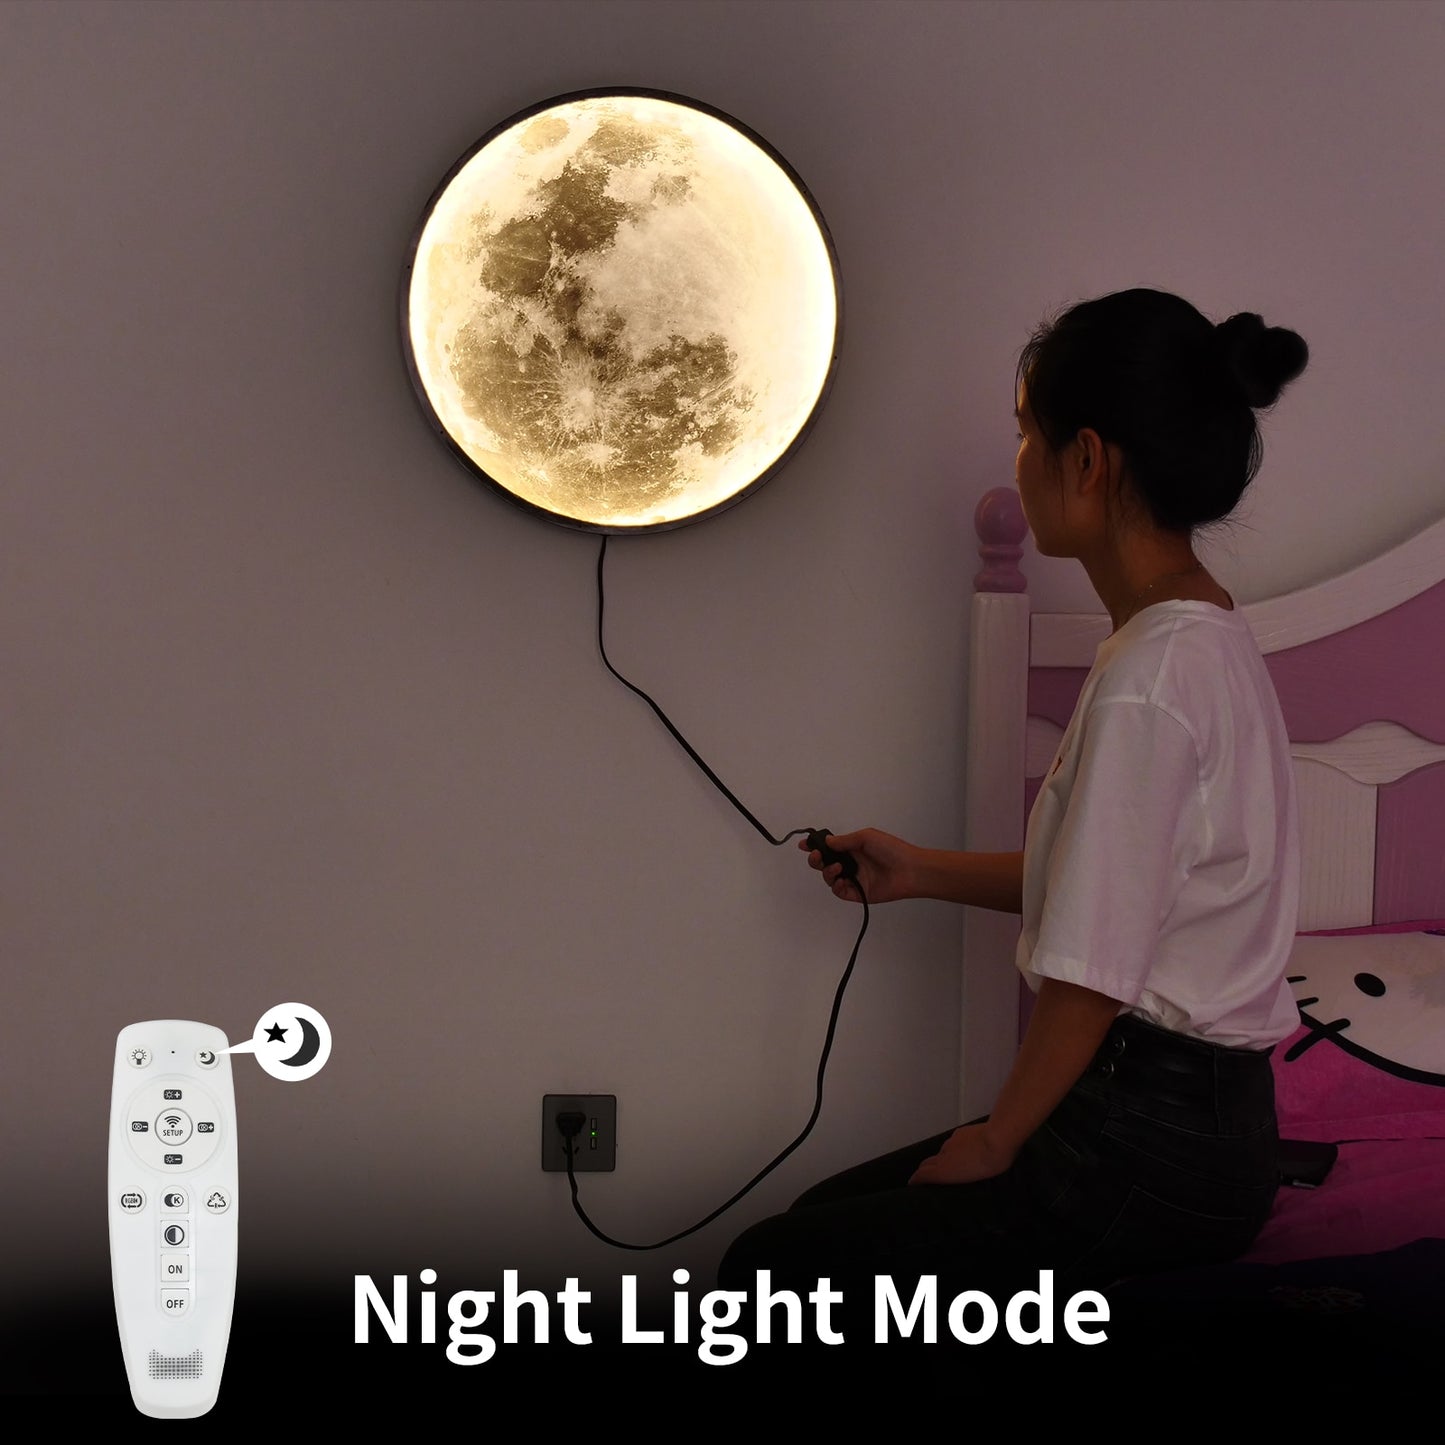 15W Dimmable MOON wall sconce lamps APP remote control Indoor Lighting lights Bedroom Living Hall Room HOME Decoration 24cm 50cm